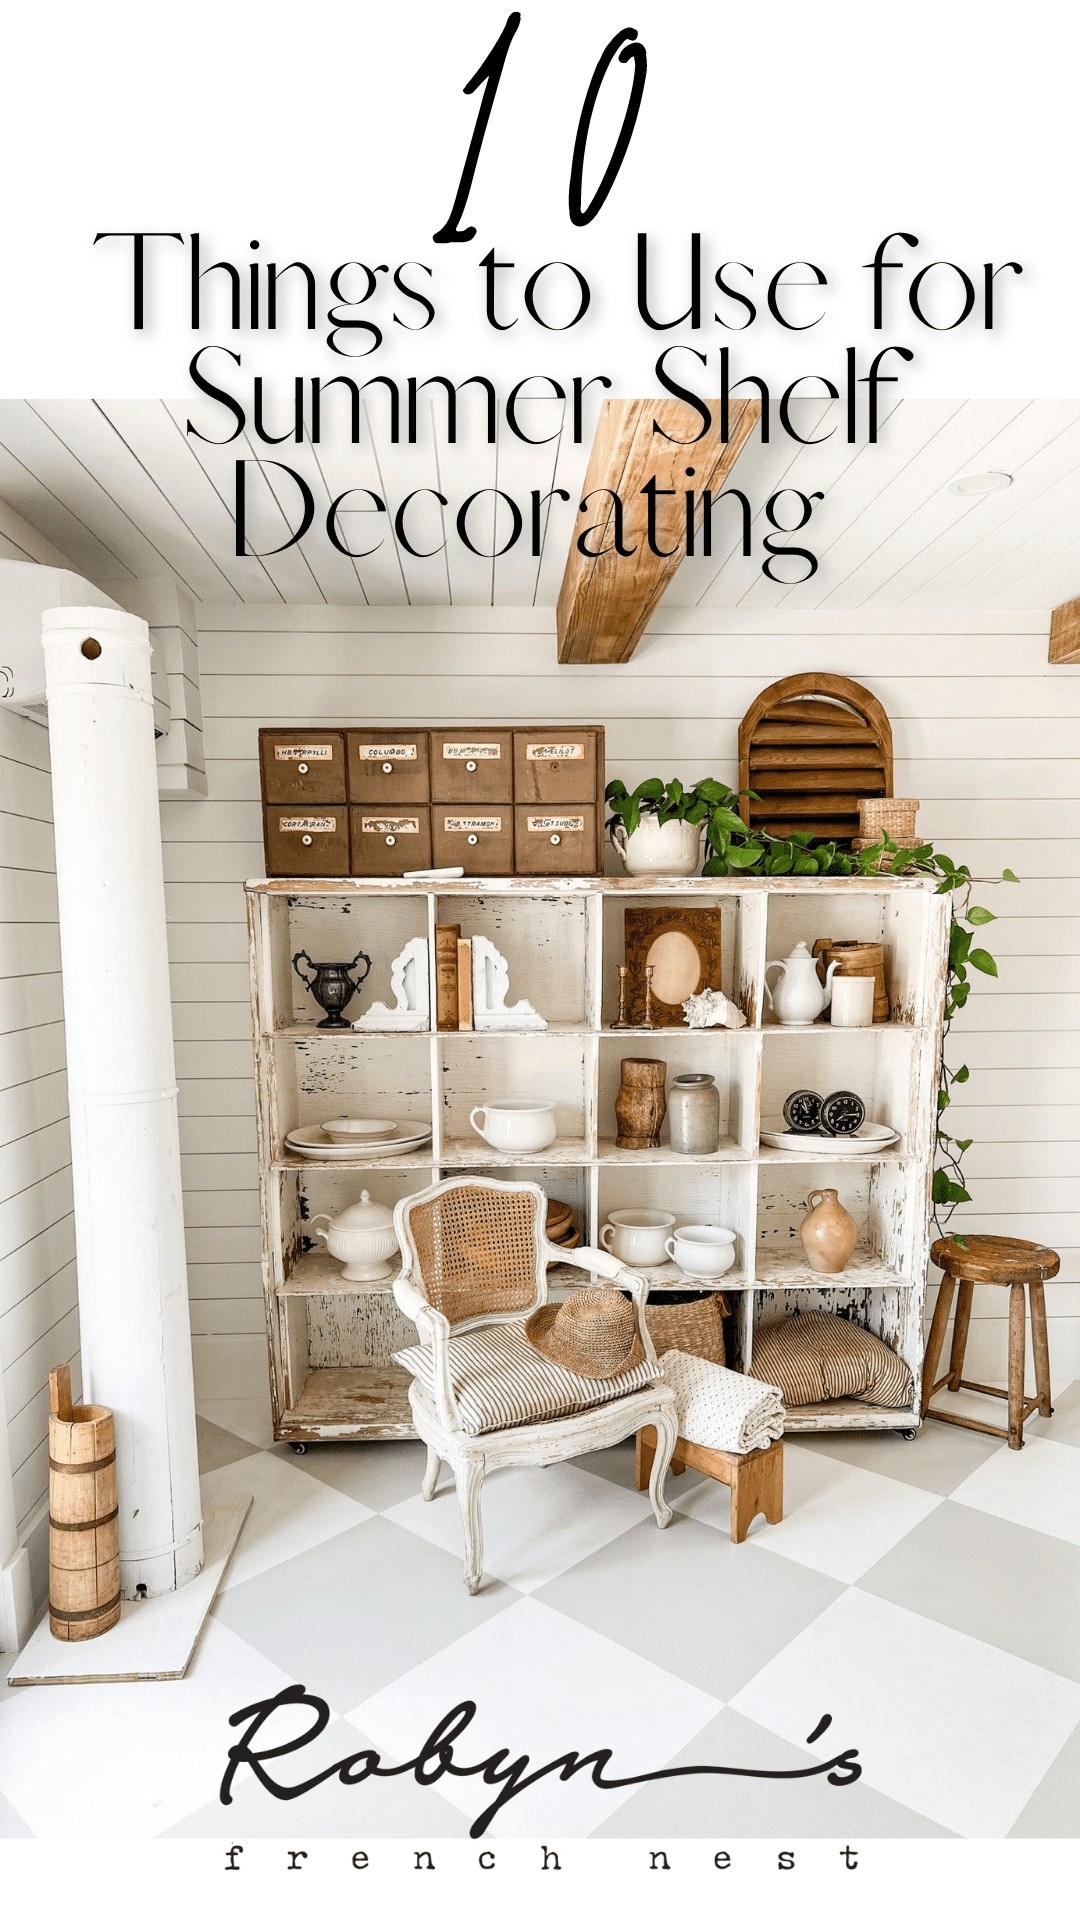 The Best 10 Things to Use in Summer Shelf Decorating